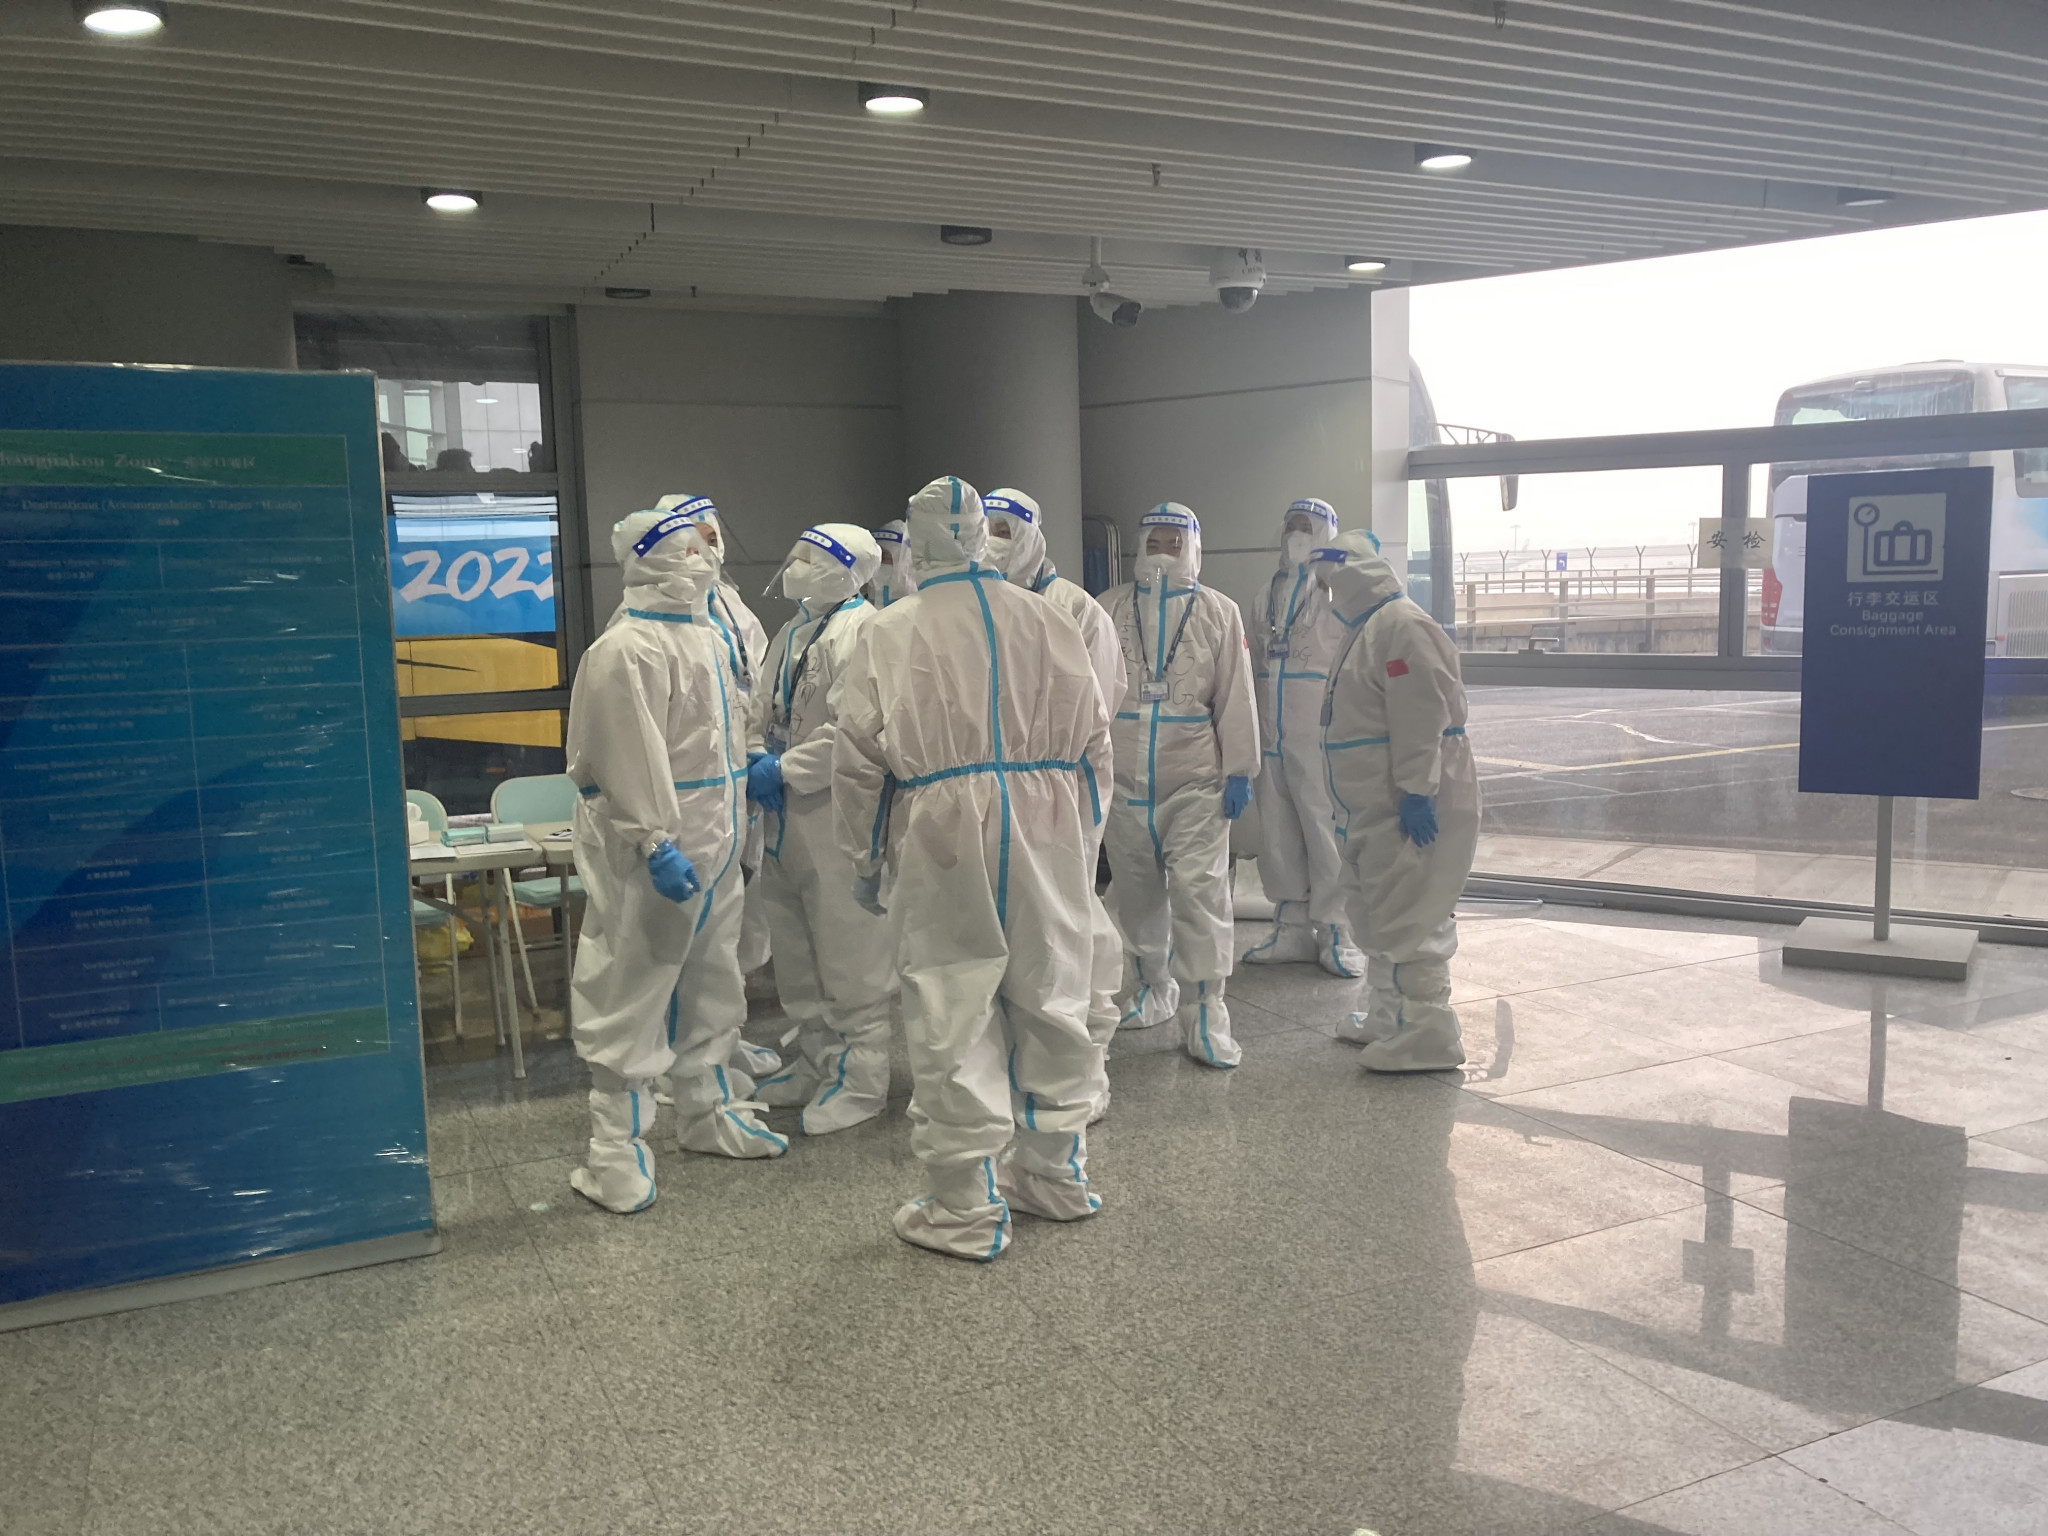 Airport workers dressed in hazmat suits greeted foreign visitors following their arrival in Beijing prior to the 2022 Winter Olympics ©ITG